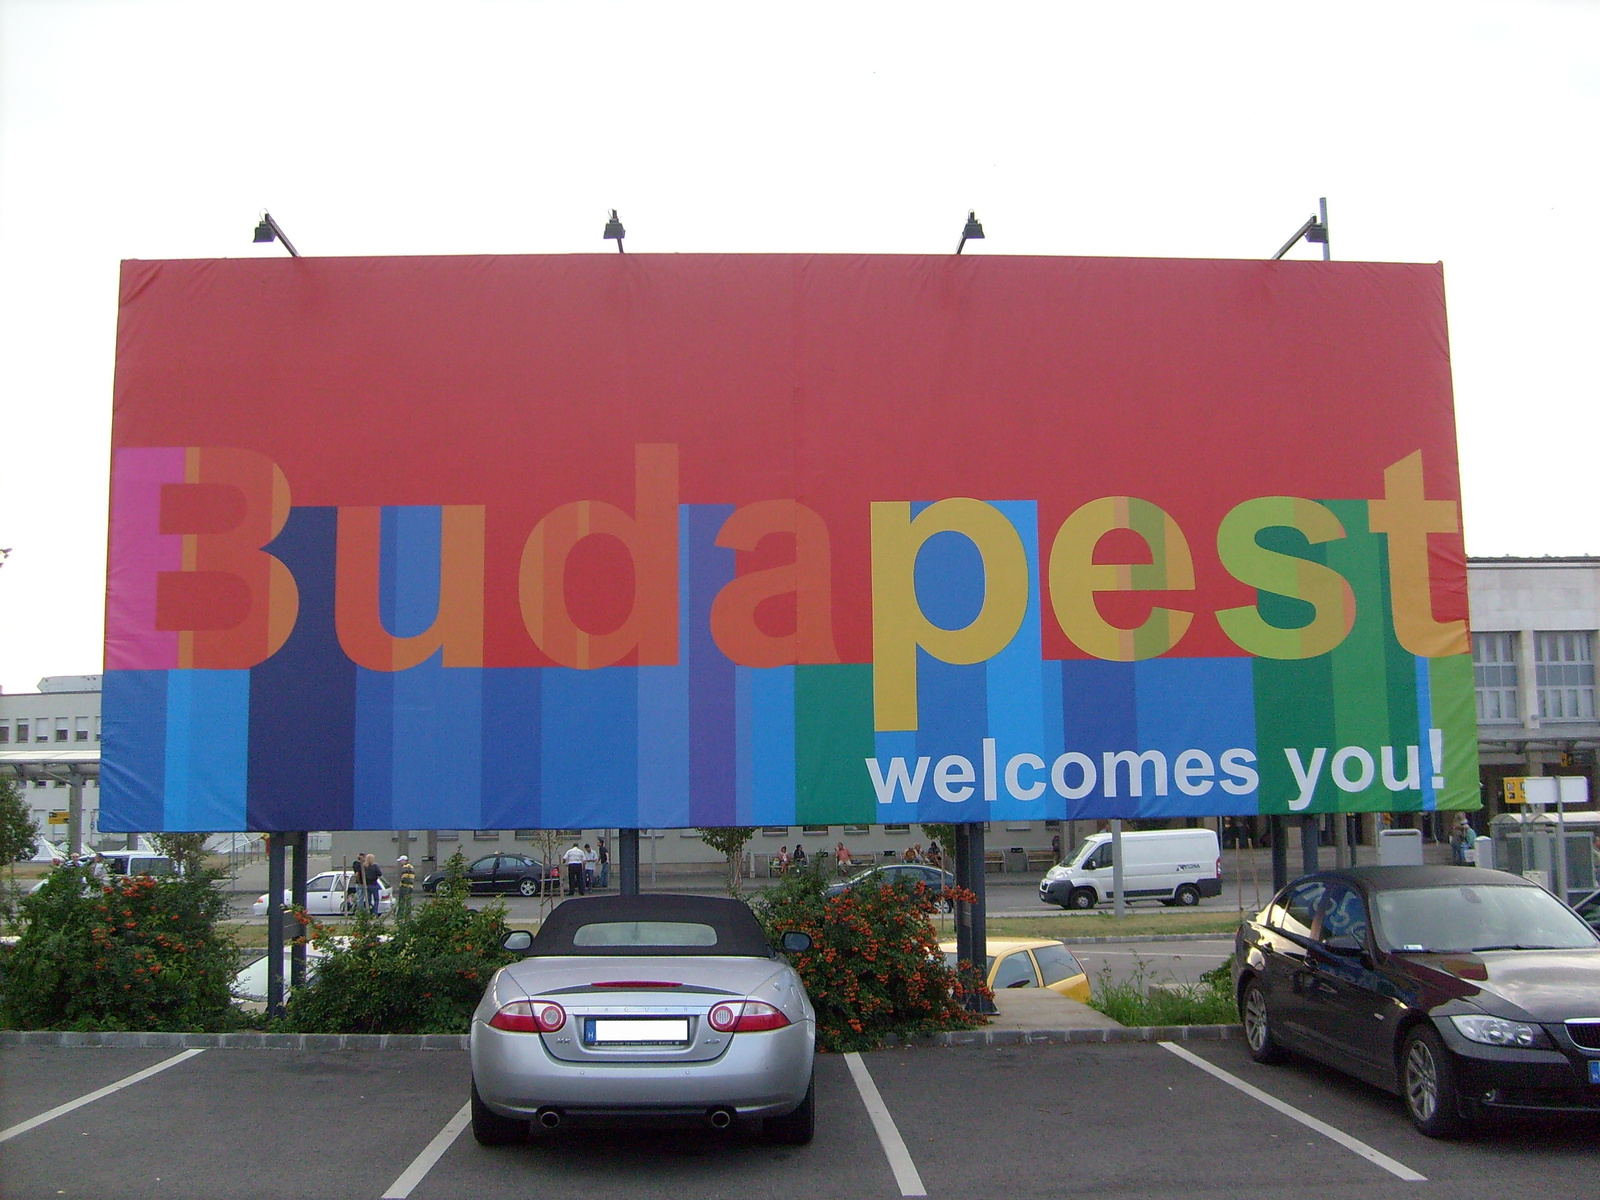 Budapest Welcomes You!